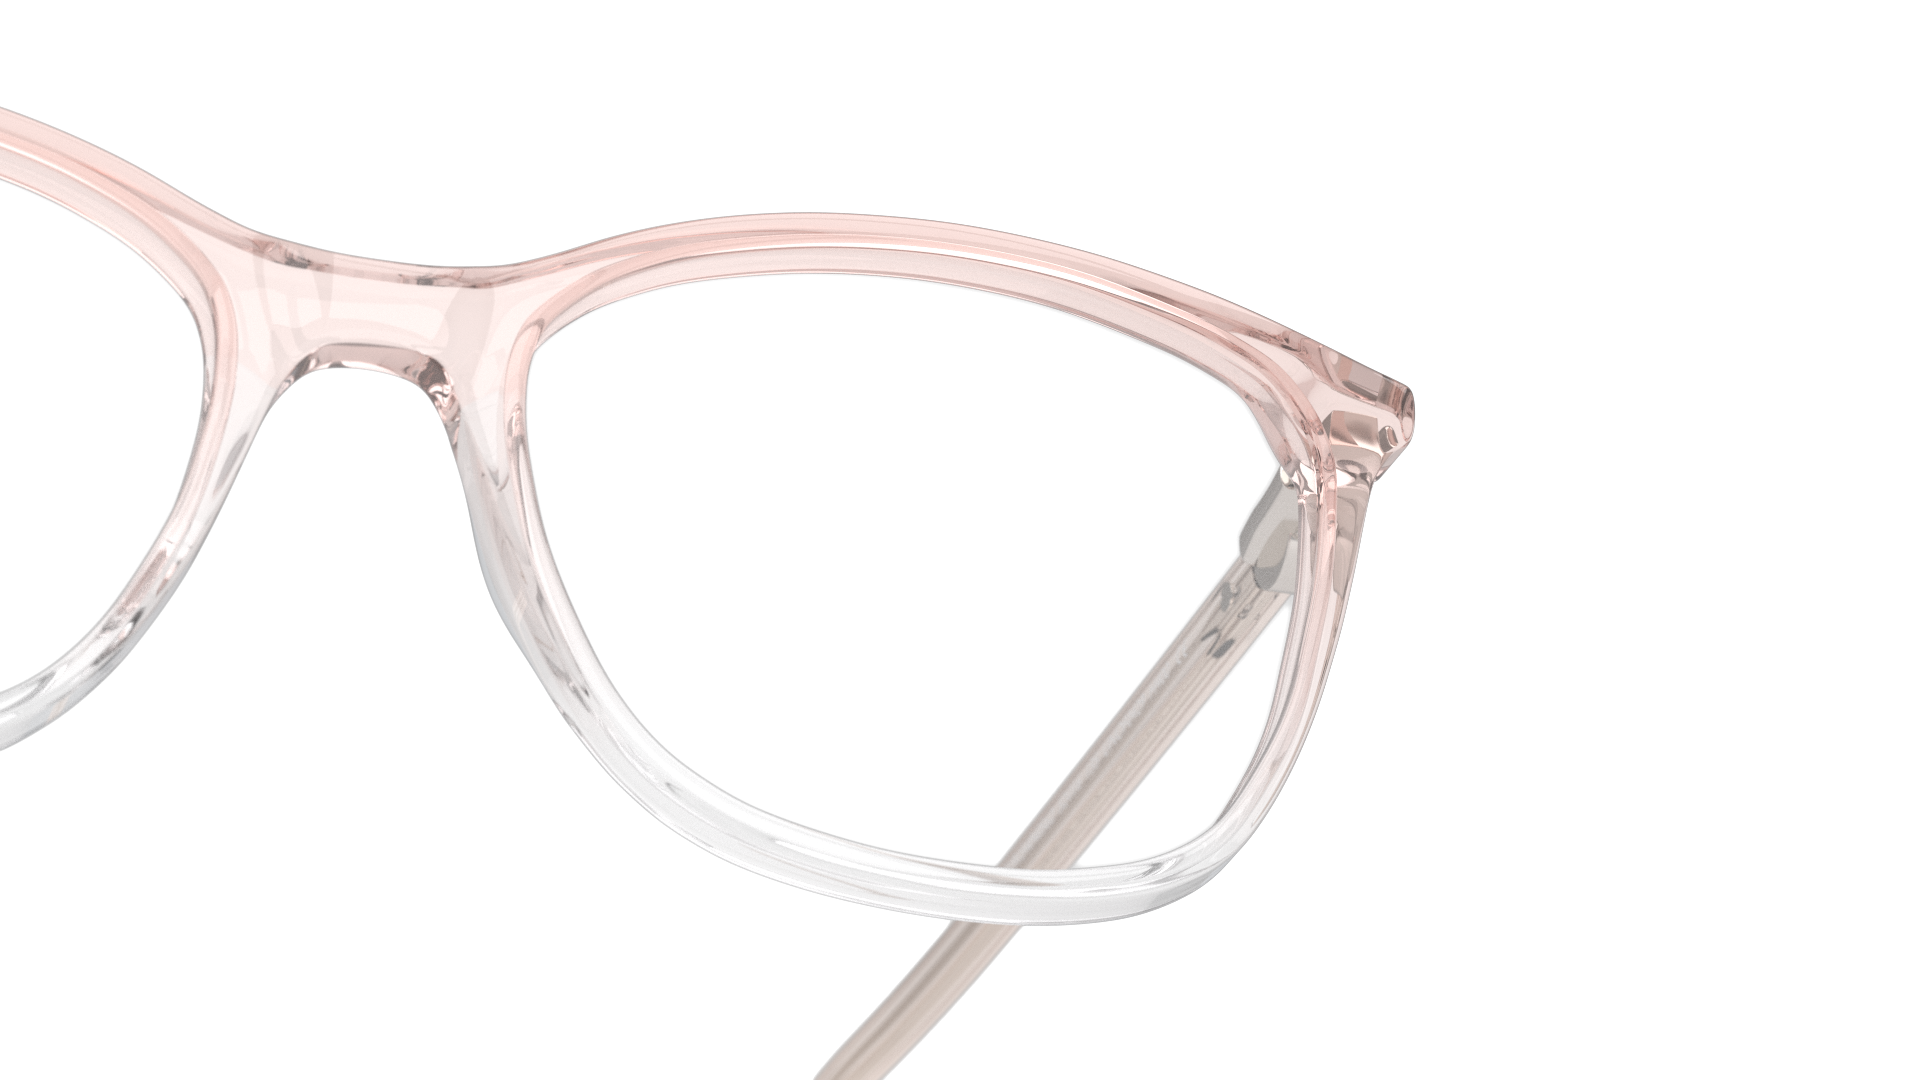 Detail01 Unofficial UNOF0429 (PX00) Glasses Transparent / Pink